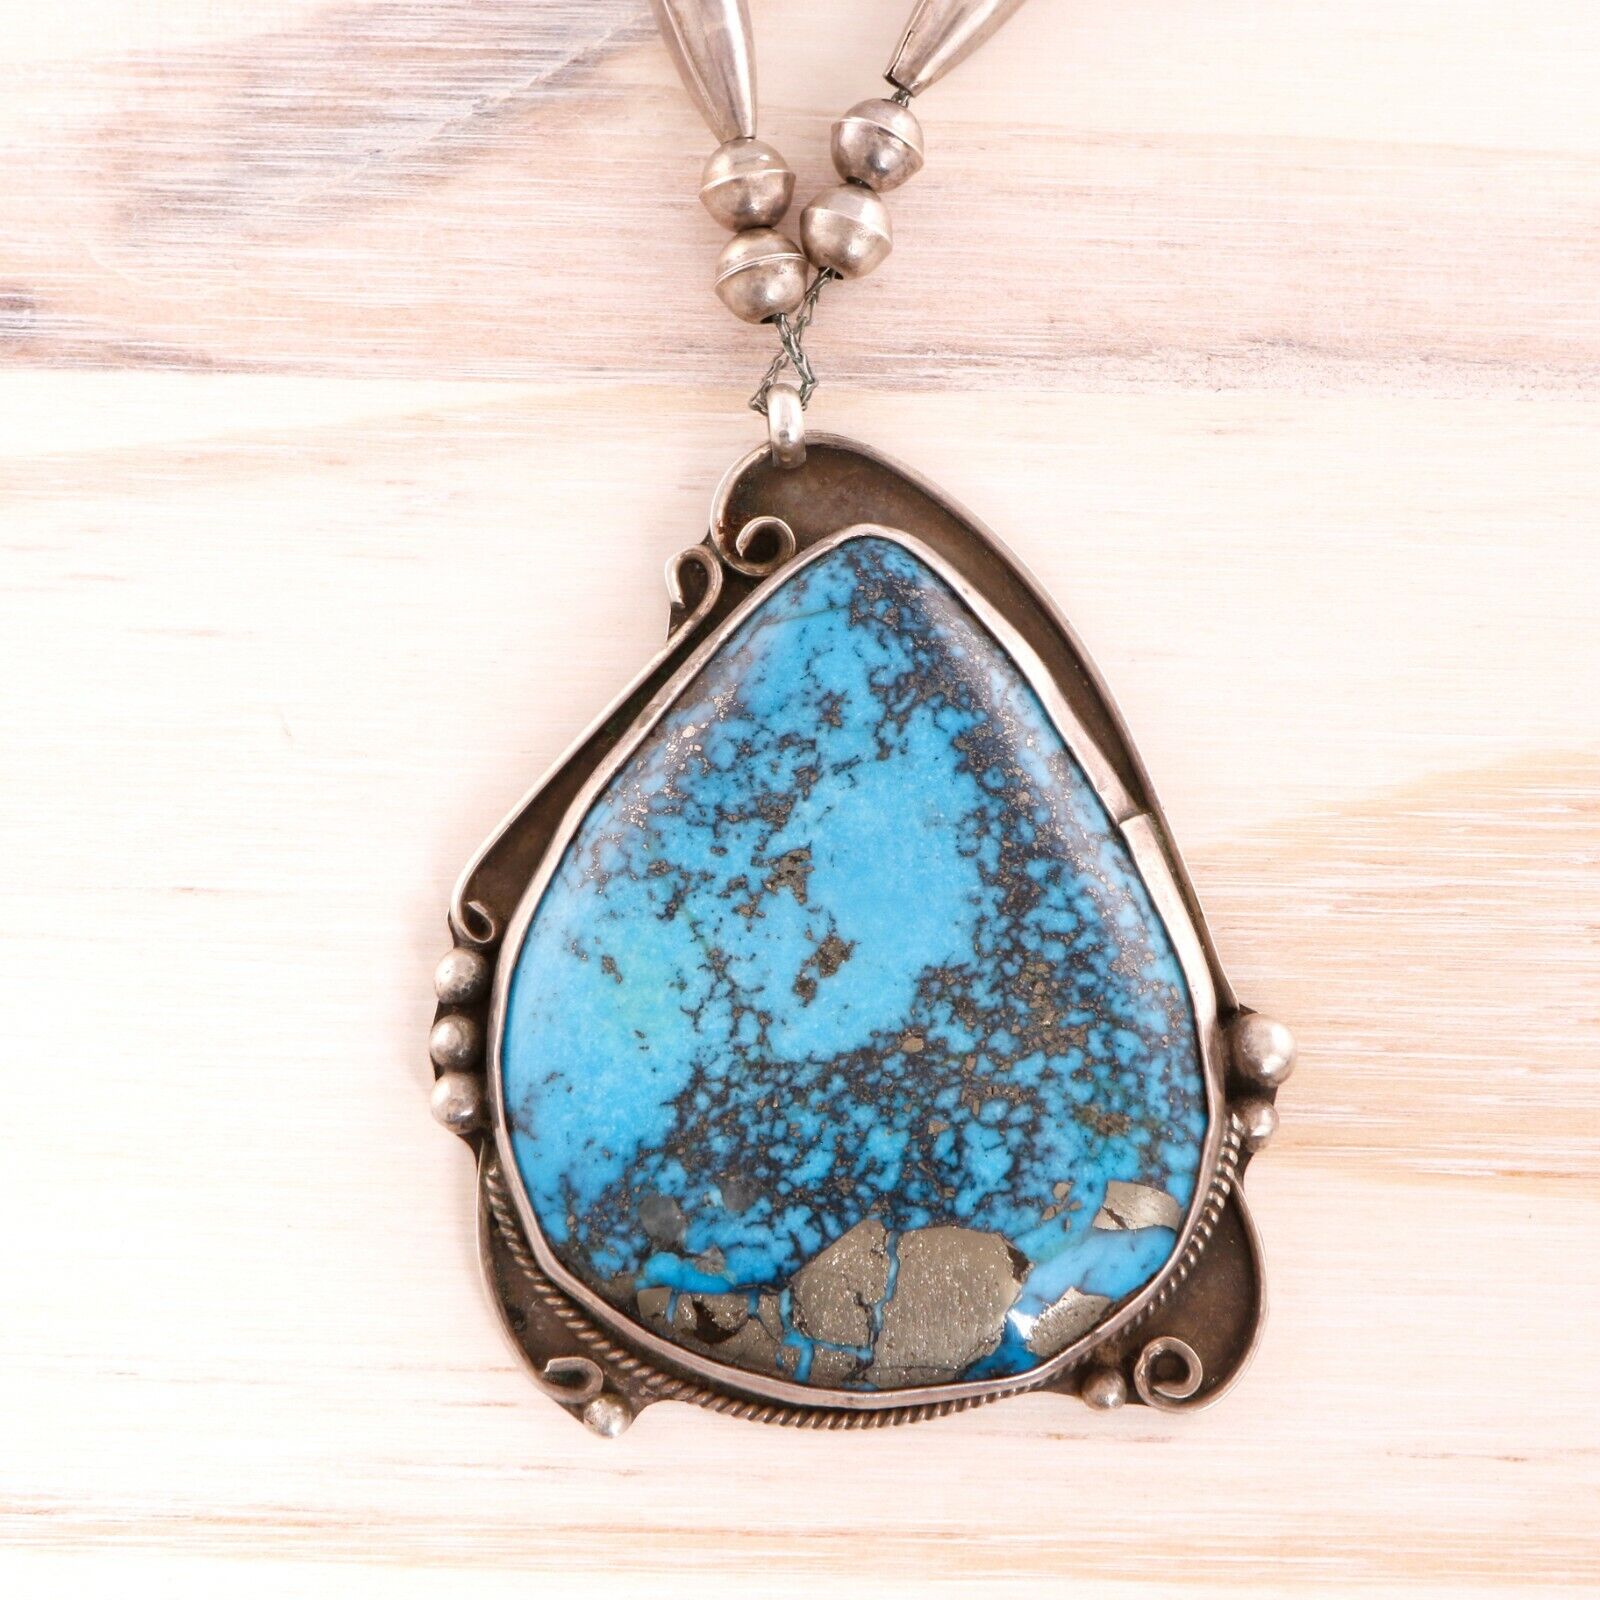 H Tsosie designed and crafted Turquoise Pendant